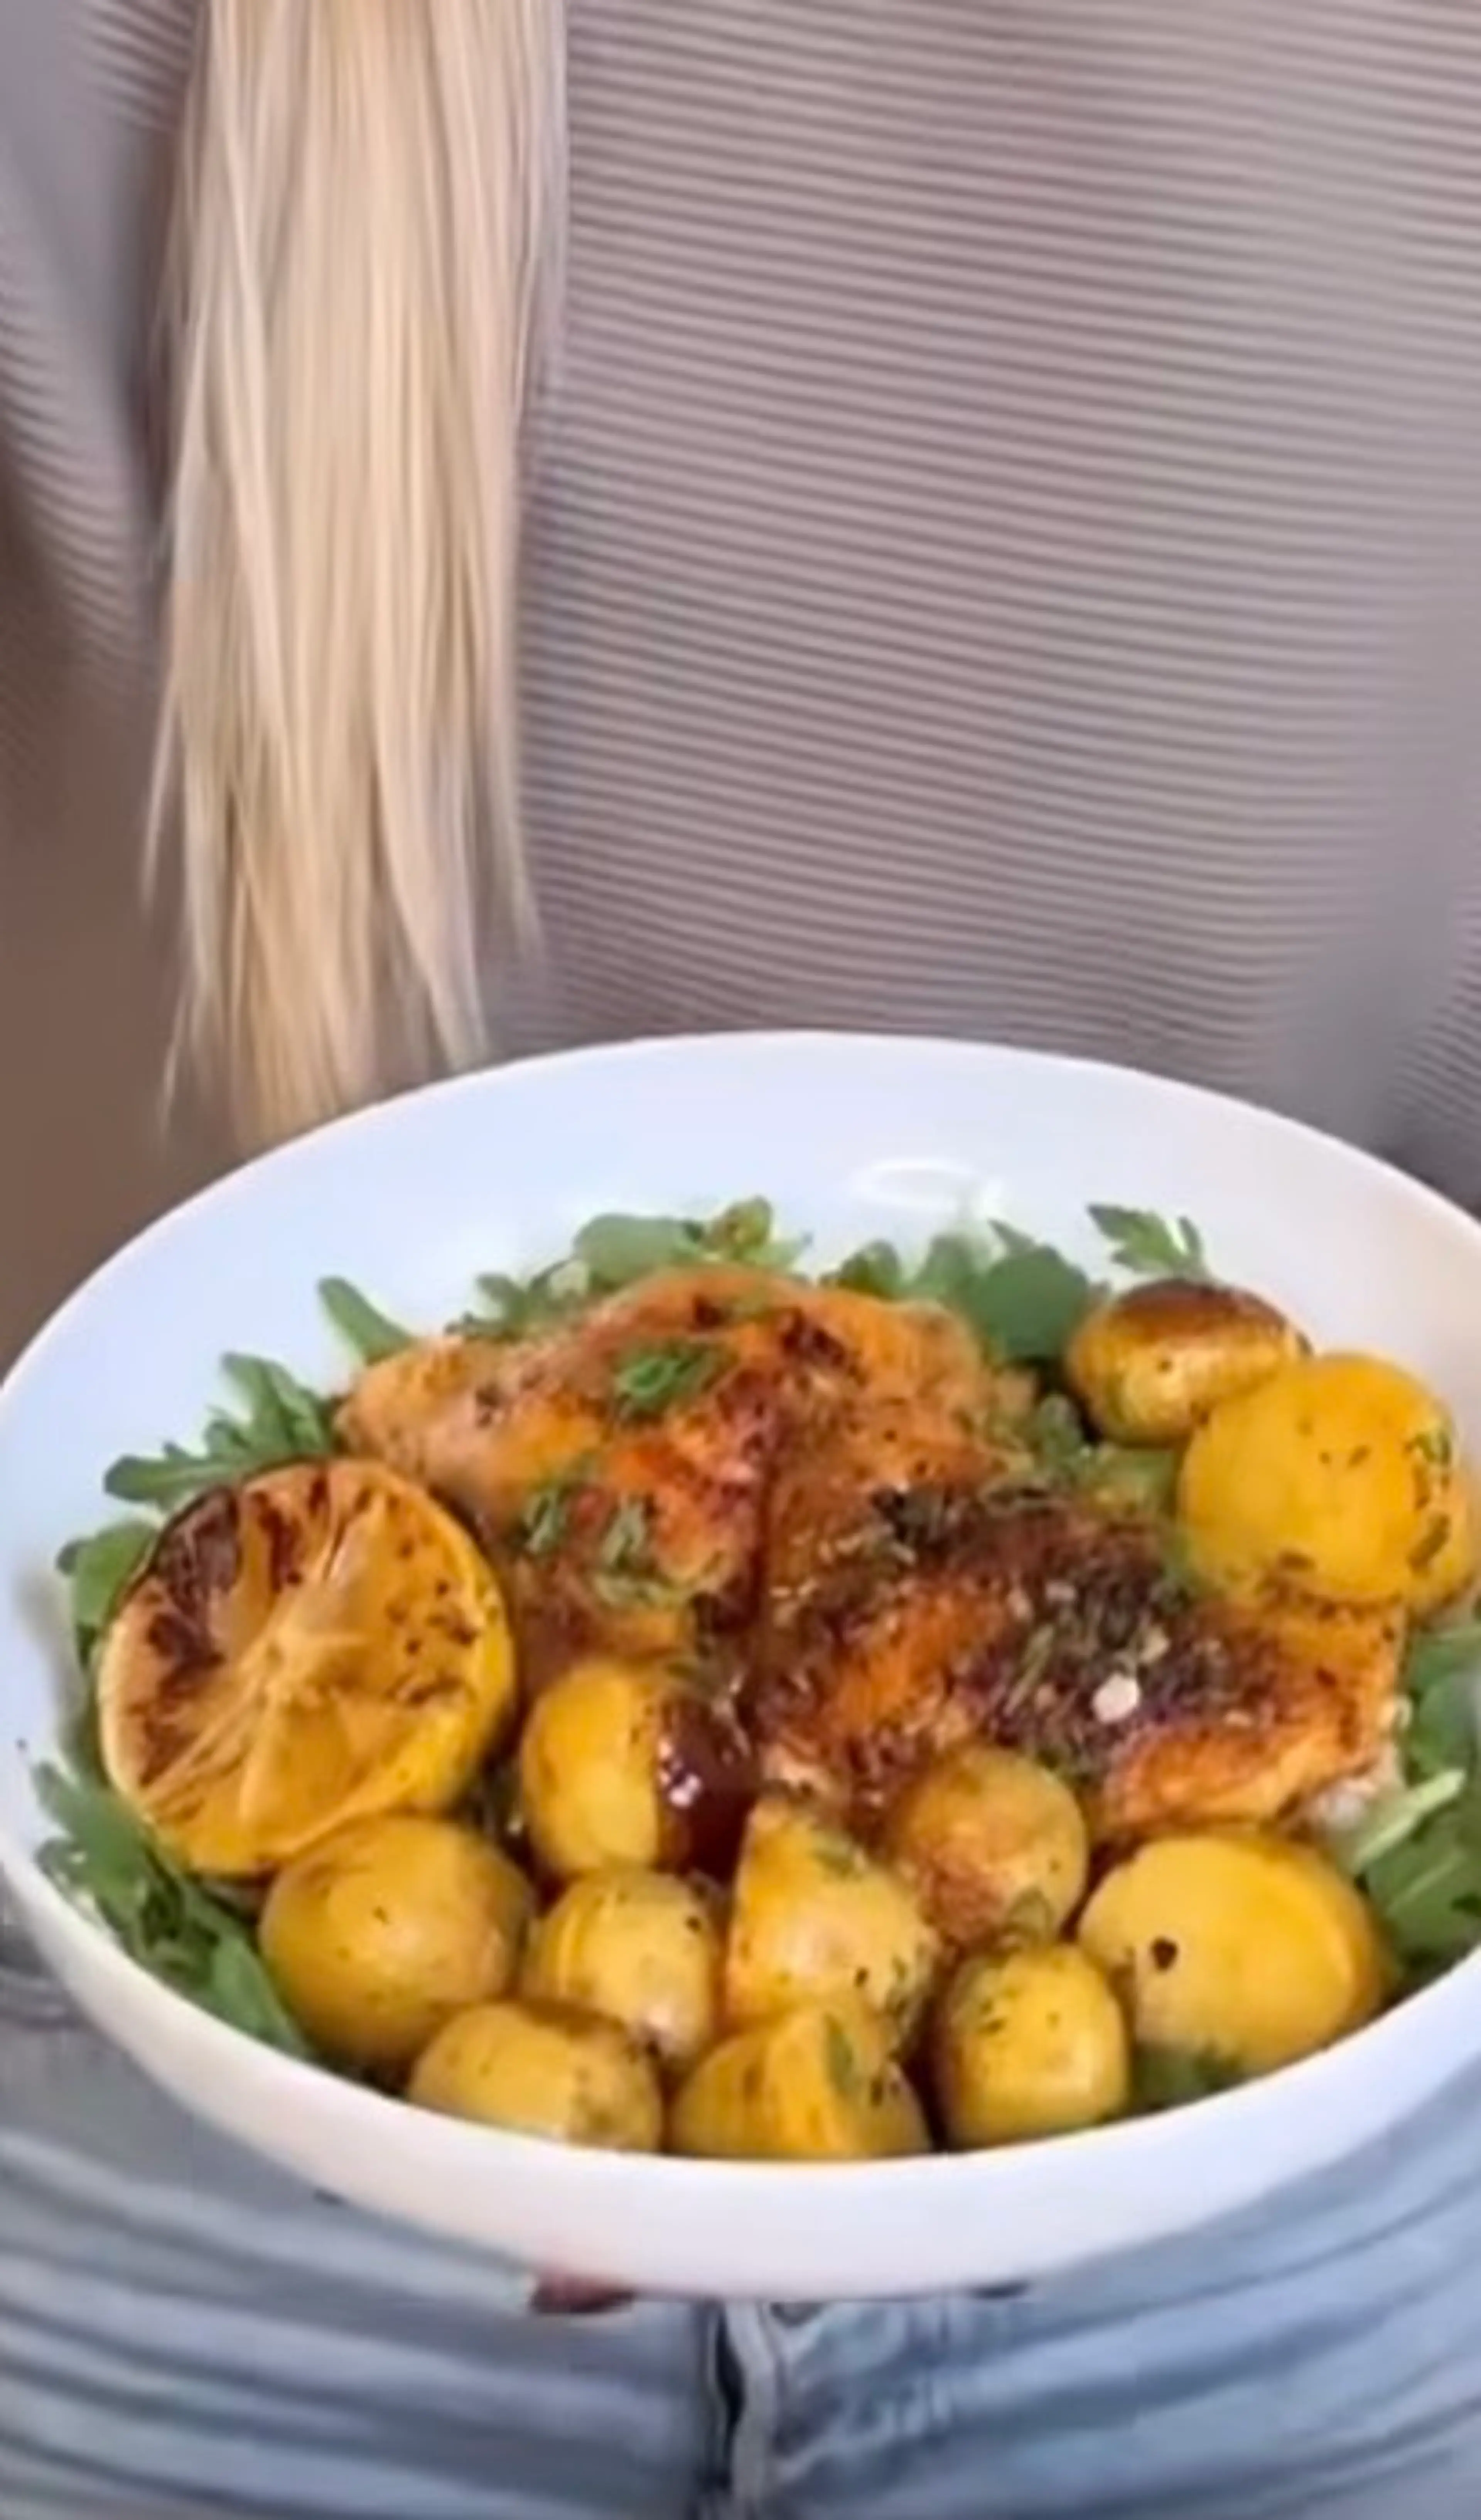 ROASTED LEMON CHICKEN AND POTATOES